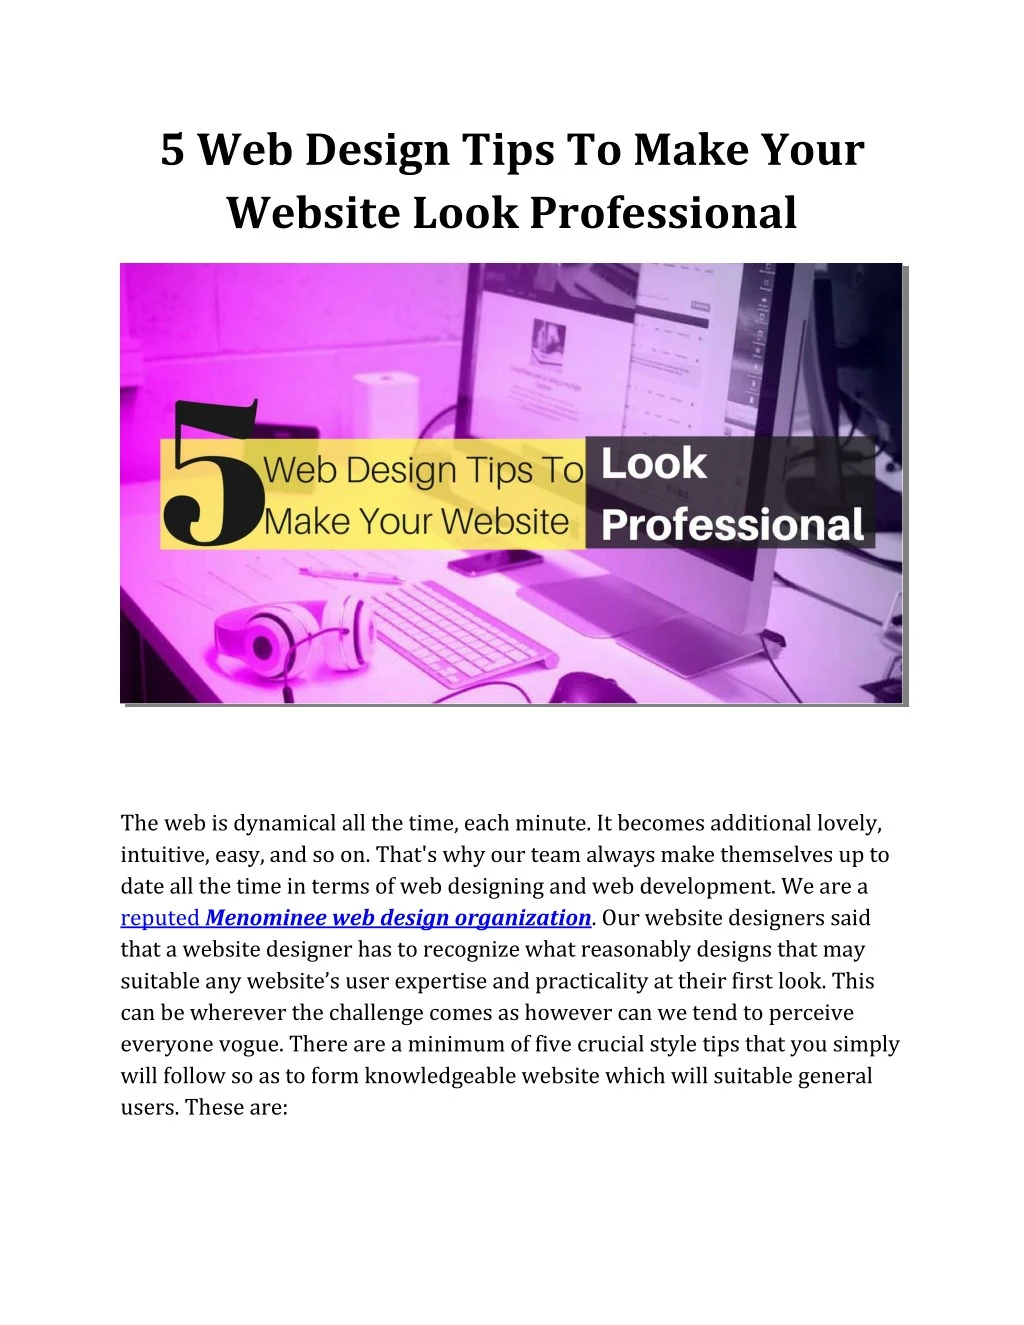 5 web design tips to make your website look